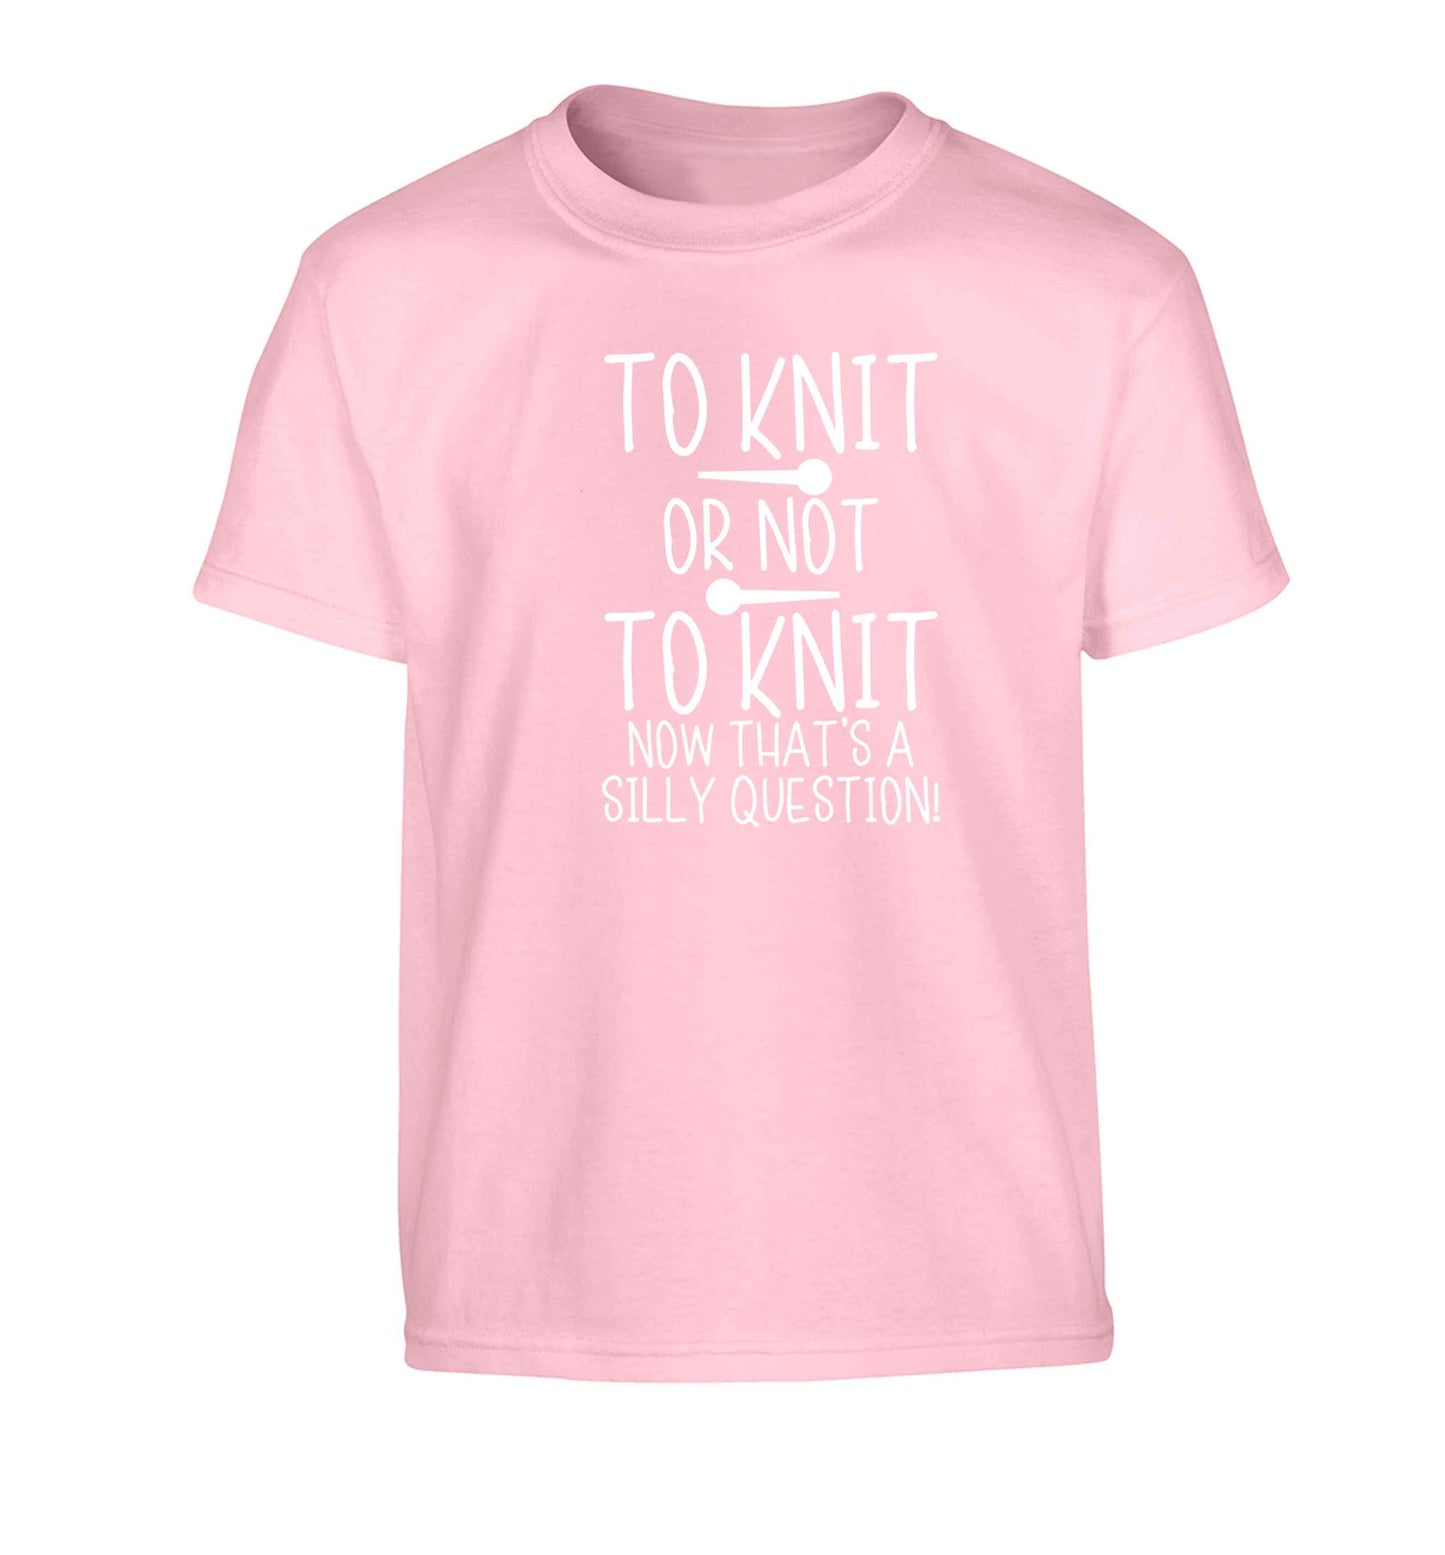 To knit or not to knit now that's a silly question Children's light pink Tshirt 12-13 Years